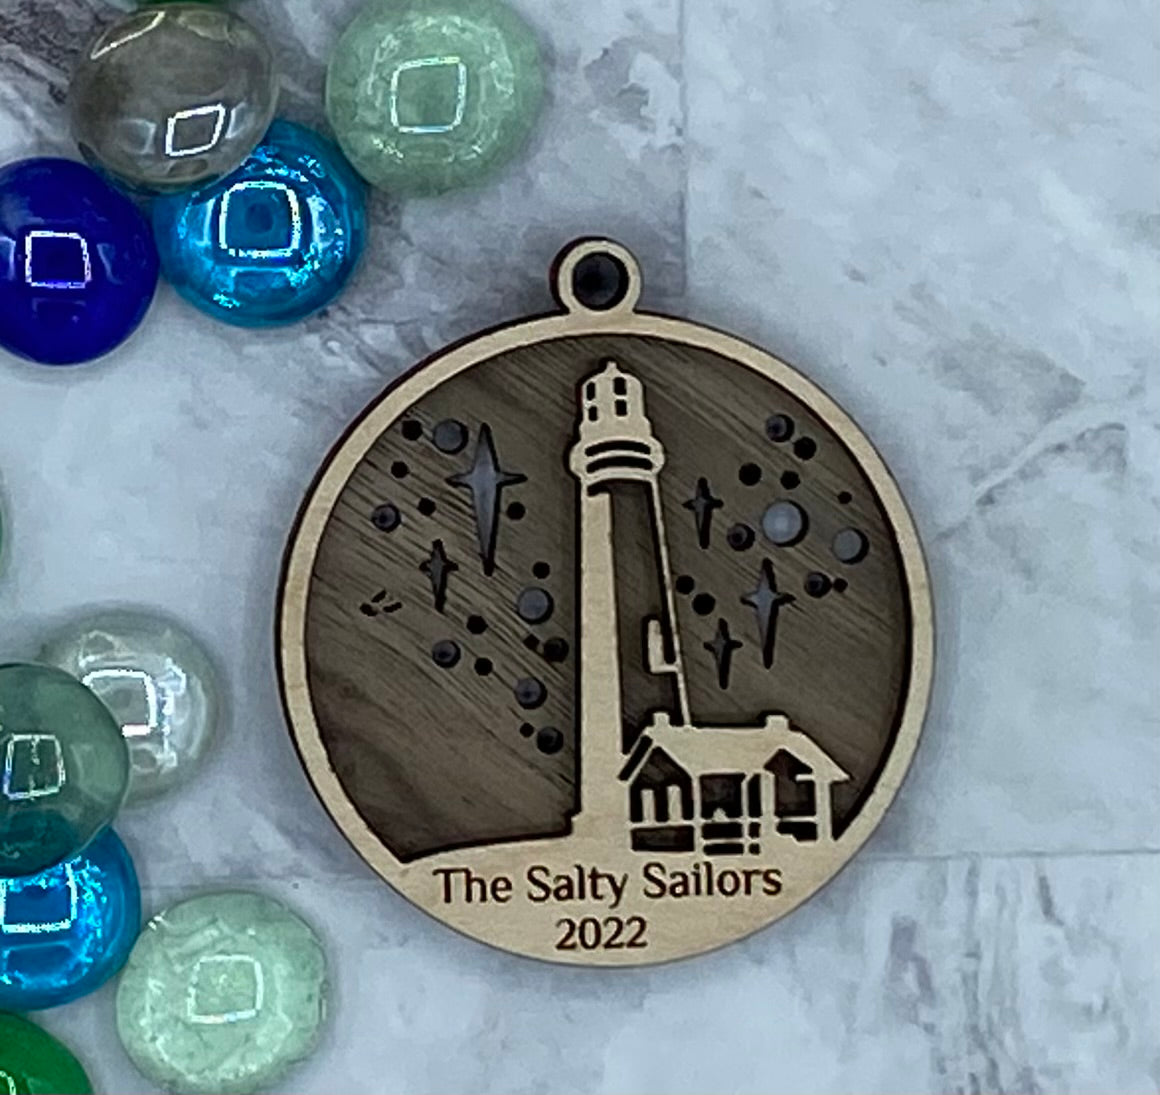 Customized Branded Airbnb VRBO STR Host Items - Lighthouse on a Starry Night ornament